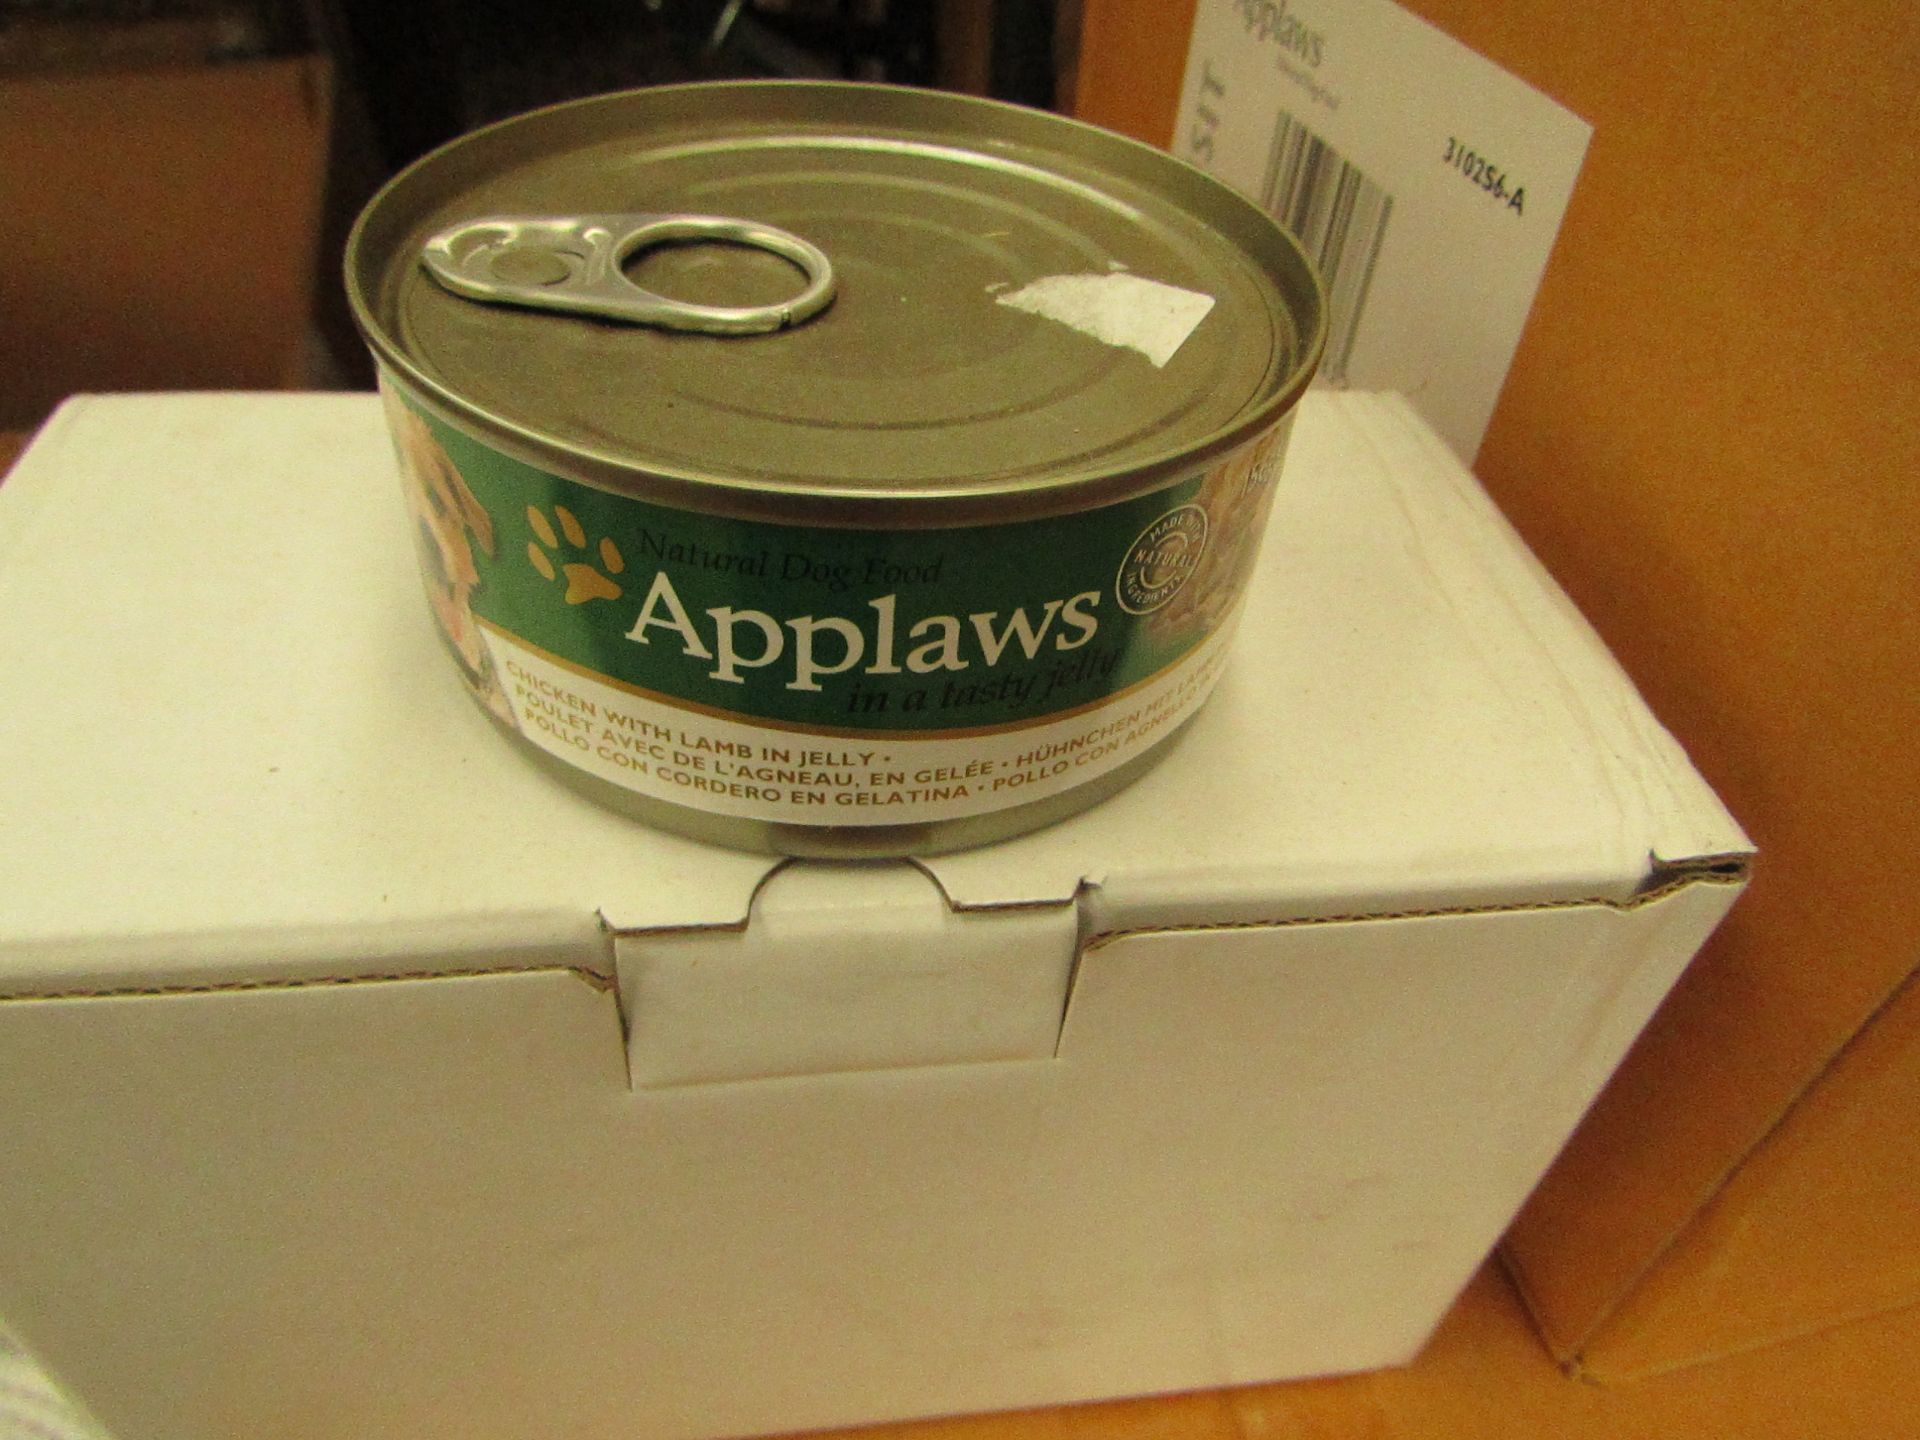 1x box of Applaws Chicken with Lamb in Jelly (Dog food) (12x6x156g=11232g) - New & Boxed.